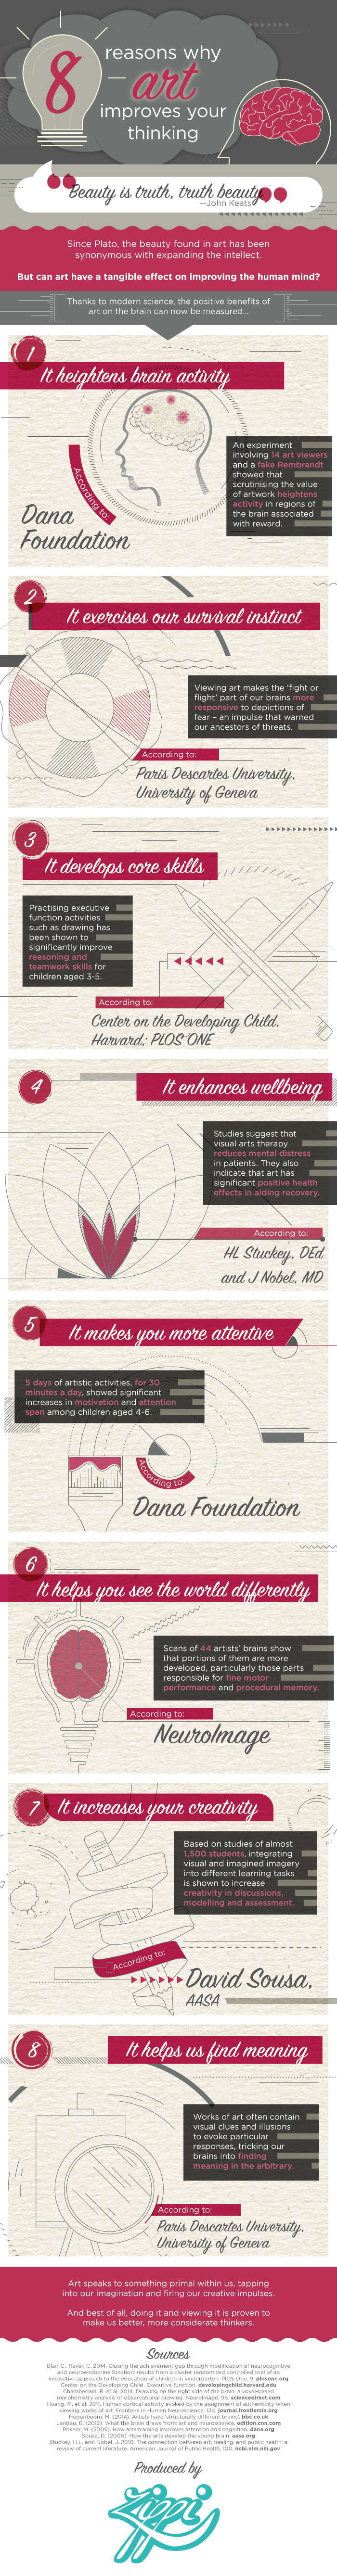 How Art Improves Thinking Infographic